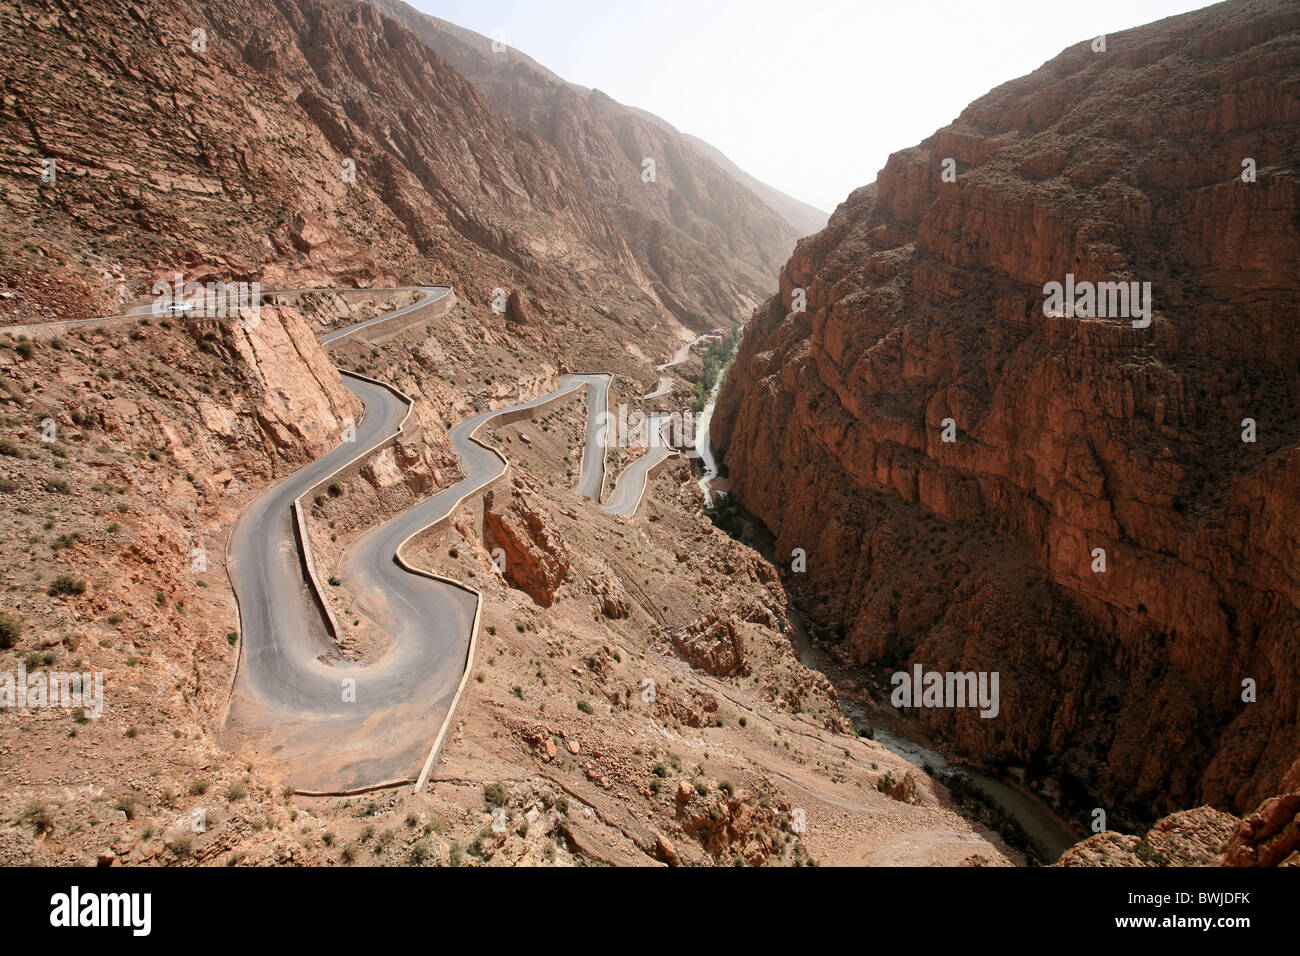 mountain pass Serpentines street mountain road gulch desert rock cliff Dades valley Gorge Morocco Africa Stock Photo